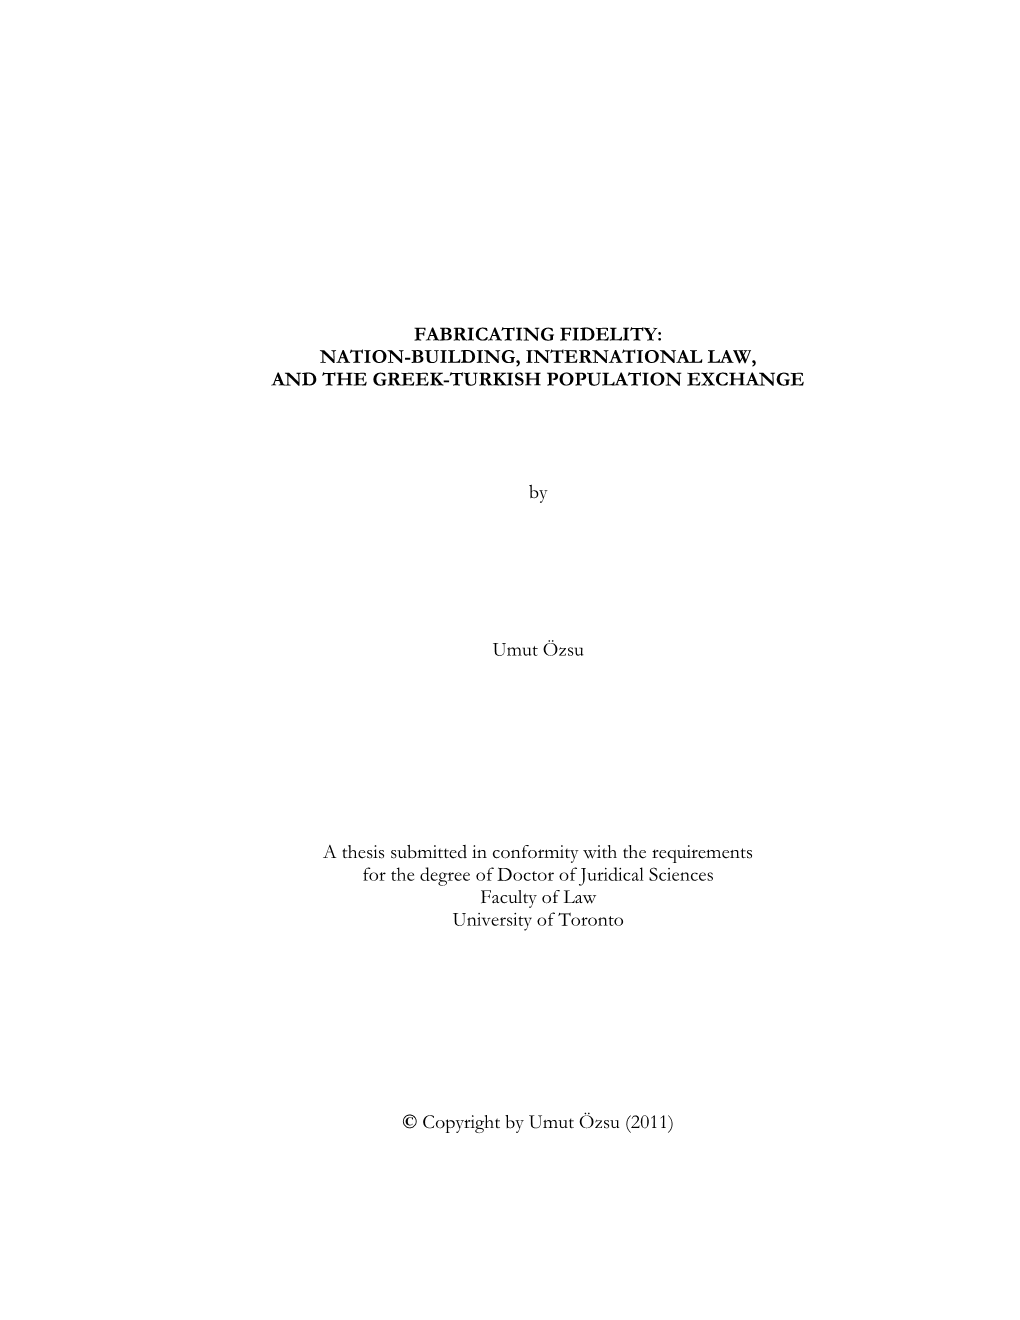 FABRICATING FIDELITY: NATION-BUILDING, INTERNATIONAL LAW, and the GREEK-TURKISH POPULATION EXCHANGE by Umut Özsu a Thesis